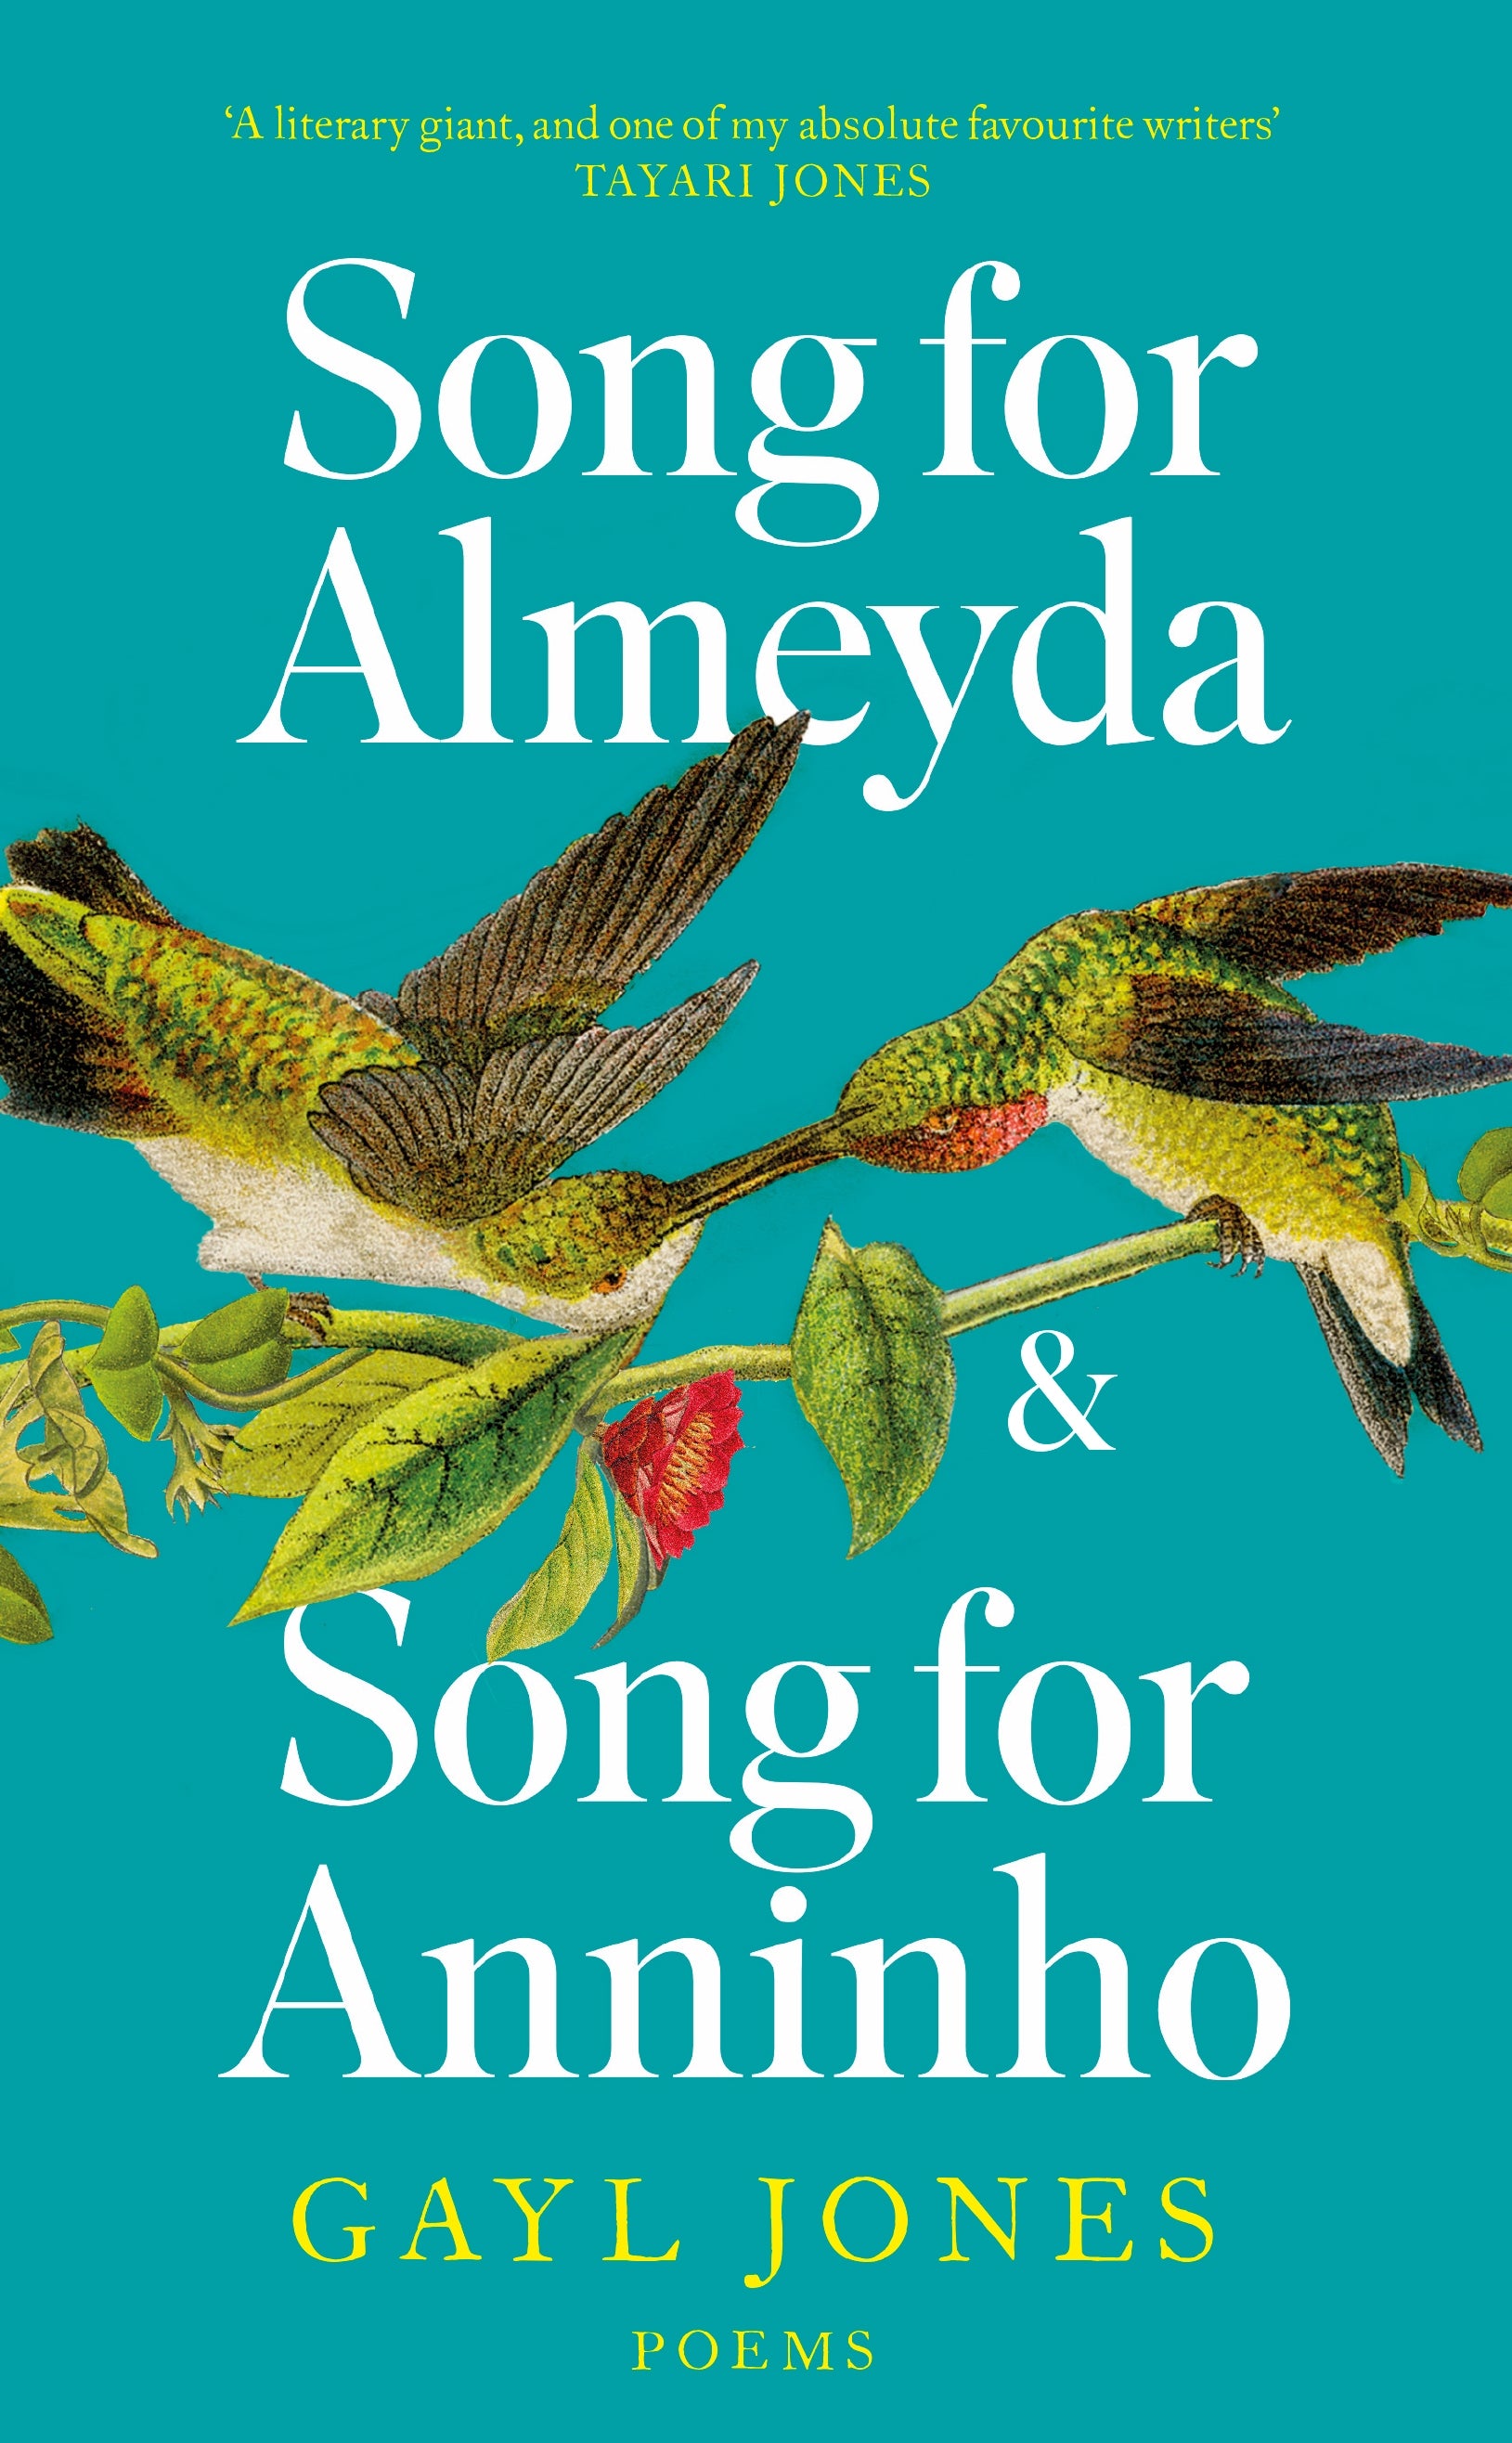 Song for Almeyda and Song for Anninho by Gayl Jones